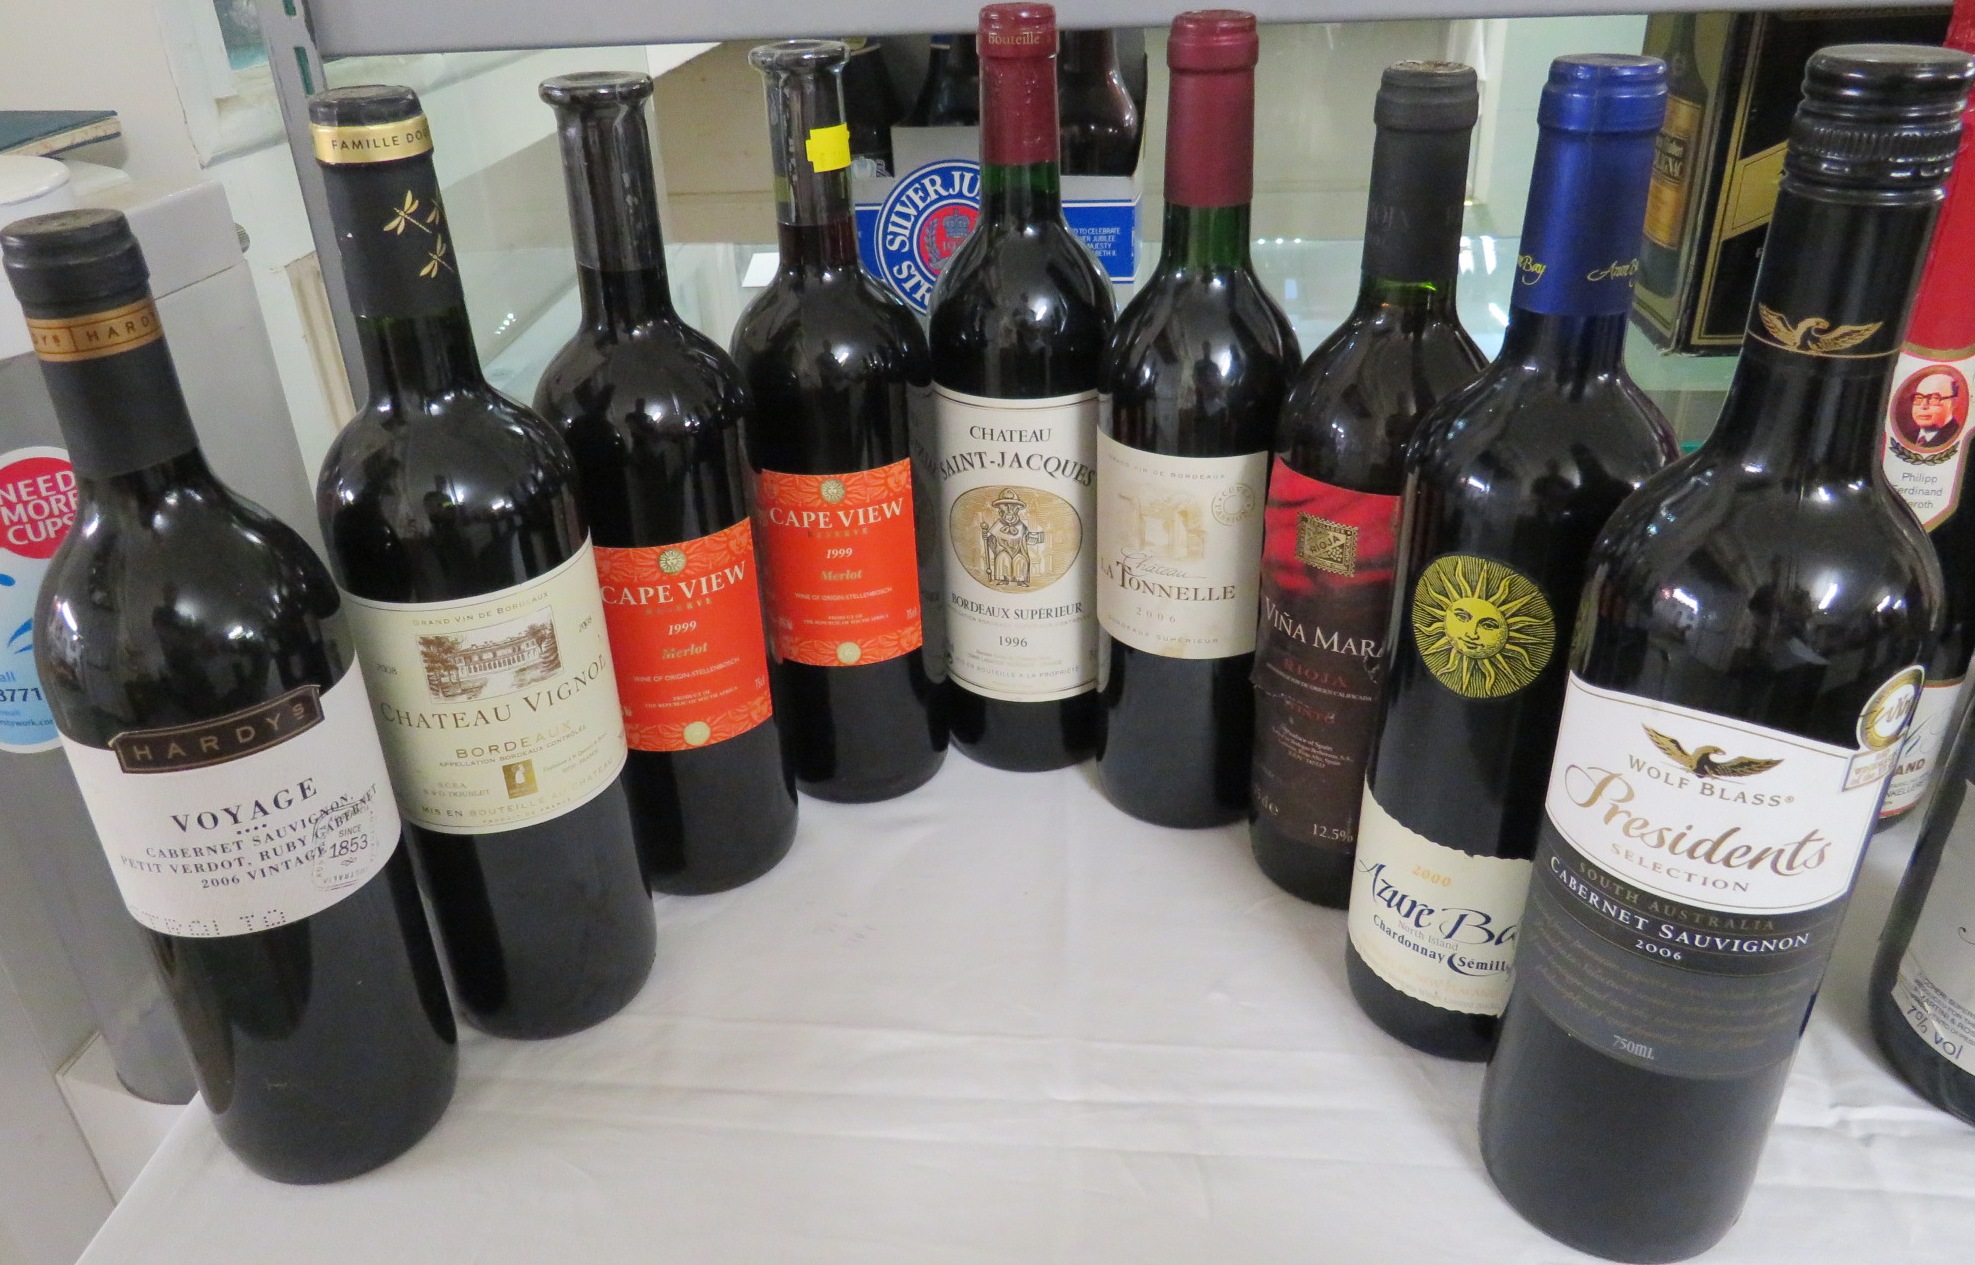 Nine bottles of red wine including two bottles of 1999 Cape View Reserve Merlot and 2000 Azure Bay